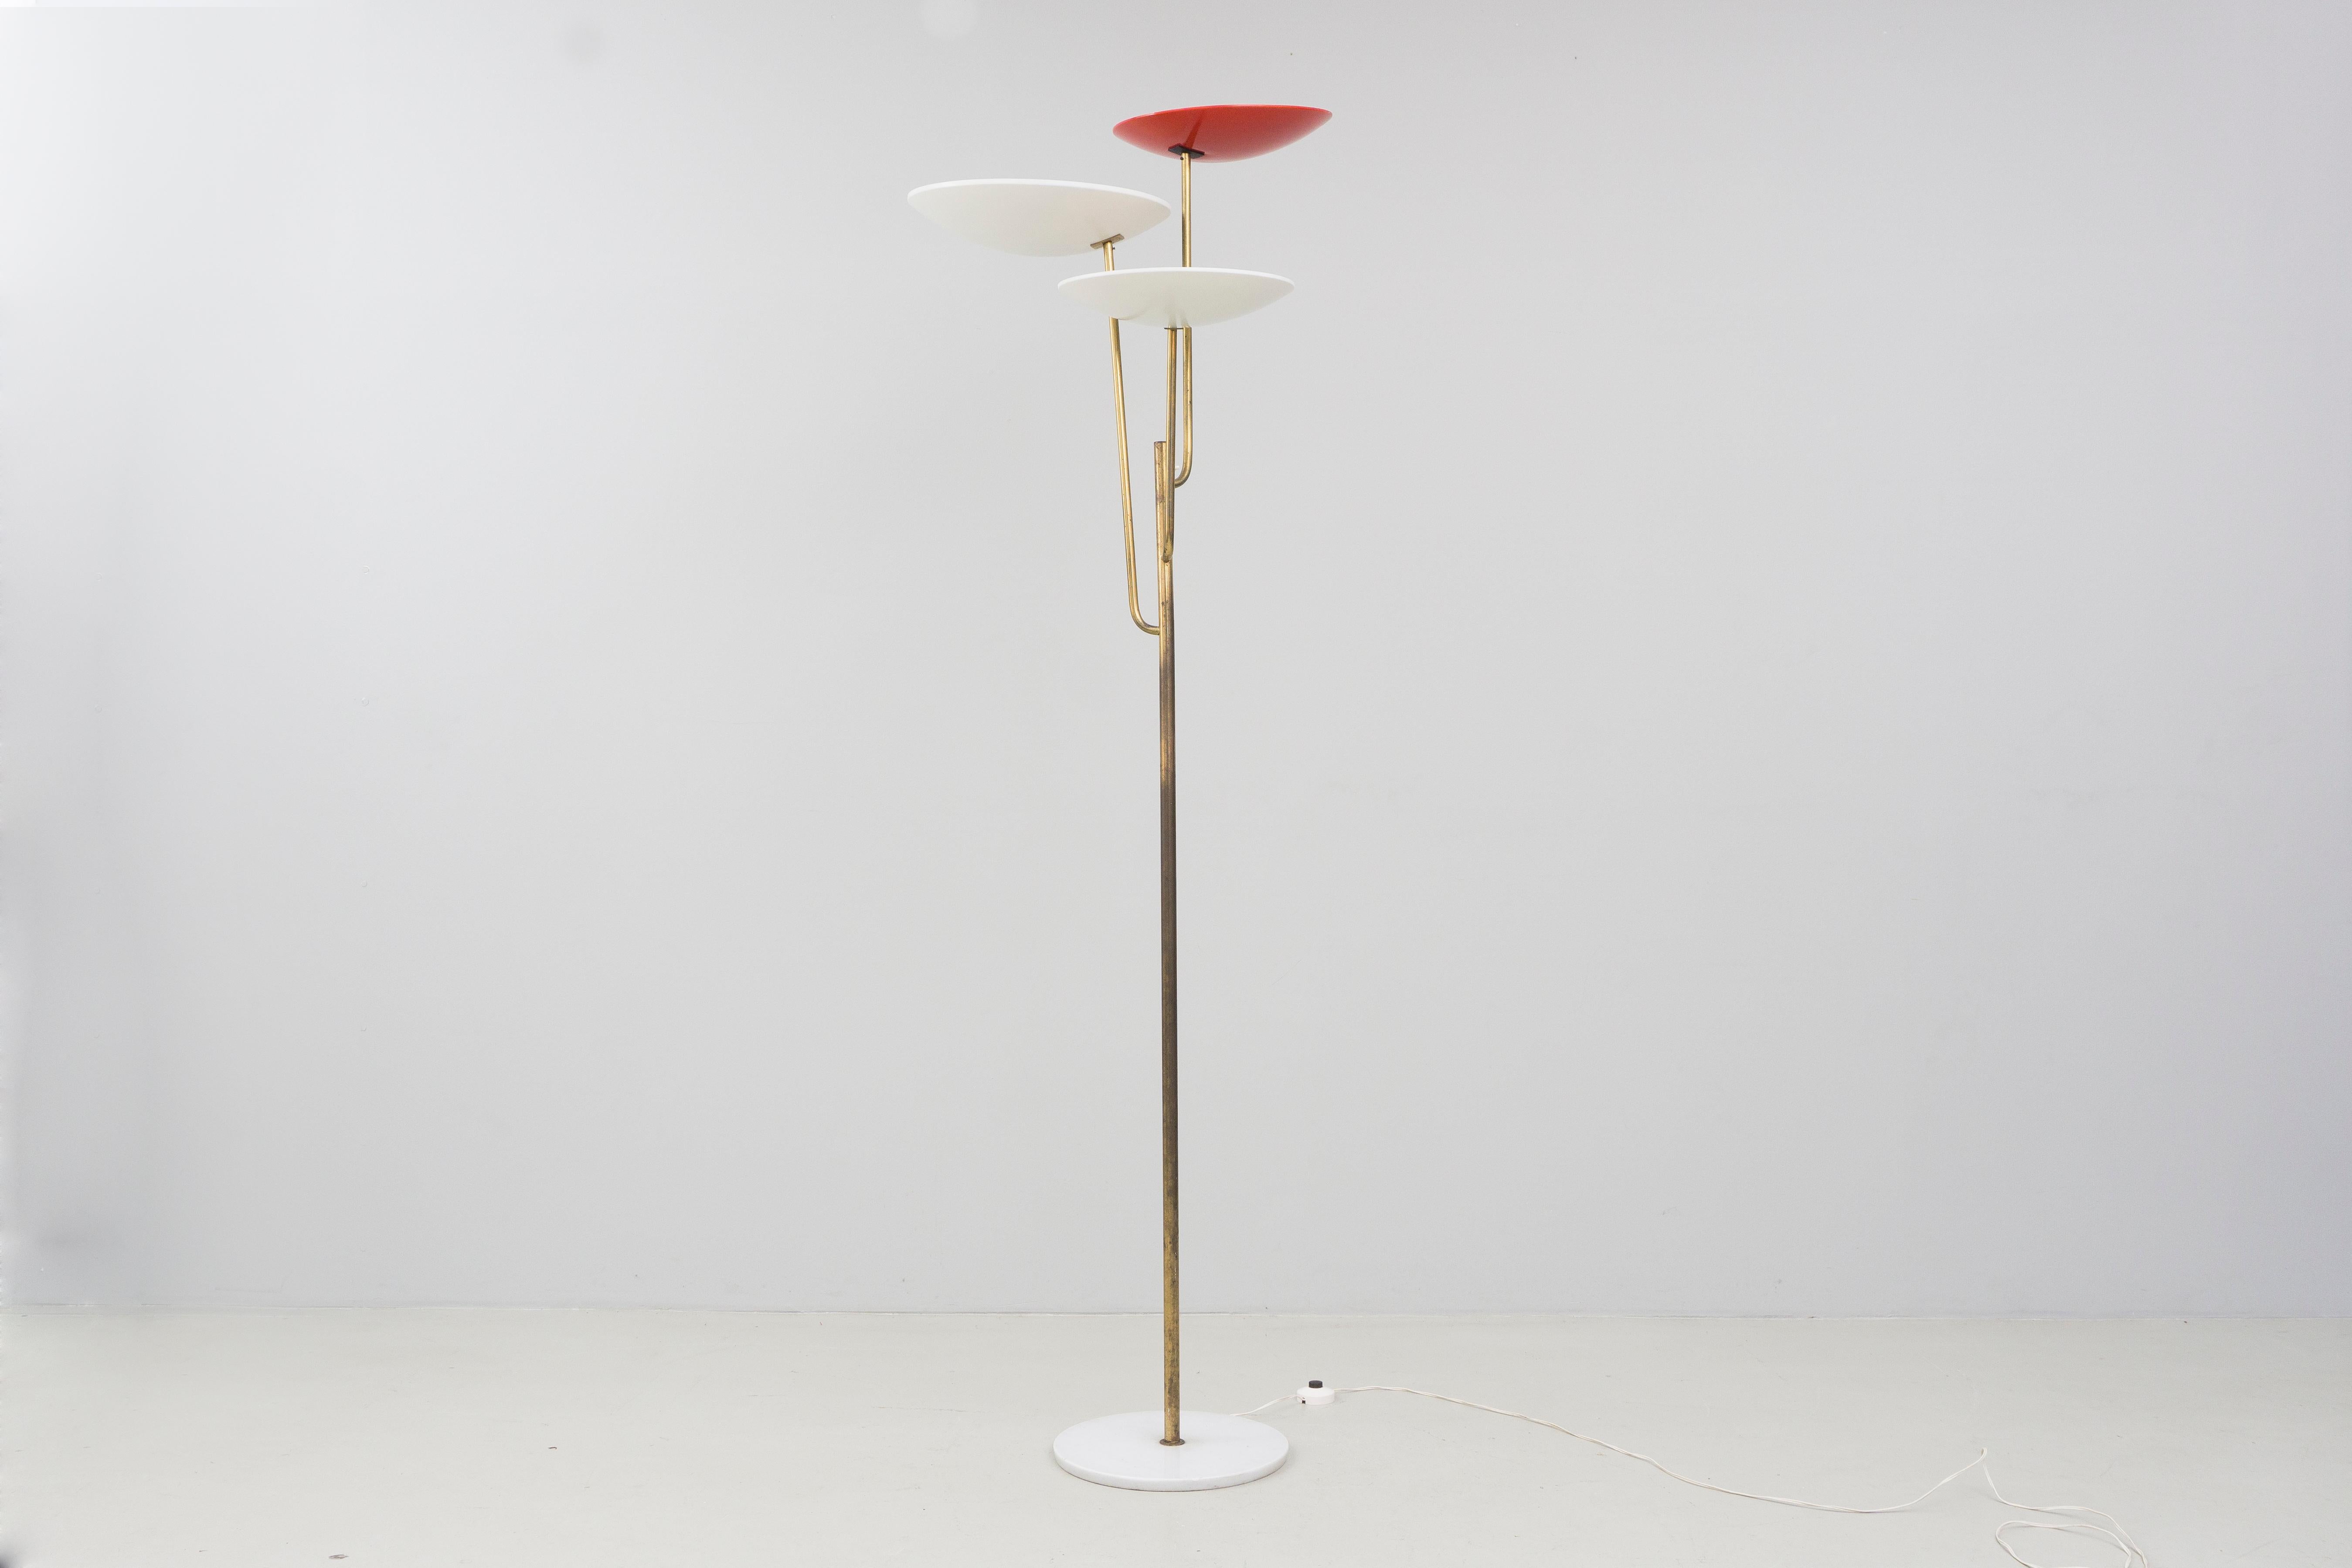 Elegant brass floor lamp by Bruno Gatta and produced by Stilnovo, Italy in 1953.
The lamp has three reflectors and a marble lampstand. The manufacturers logo is visible inside of the lampshade.

This lamp is especially extravagant due to its